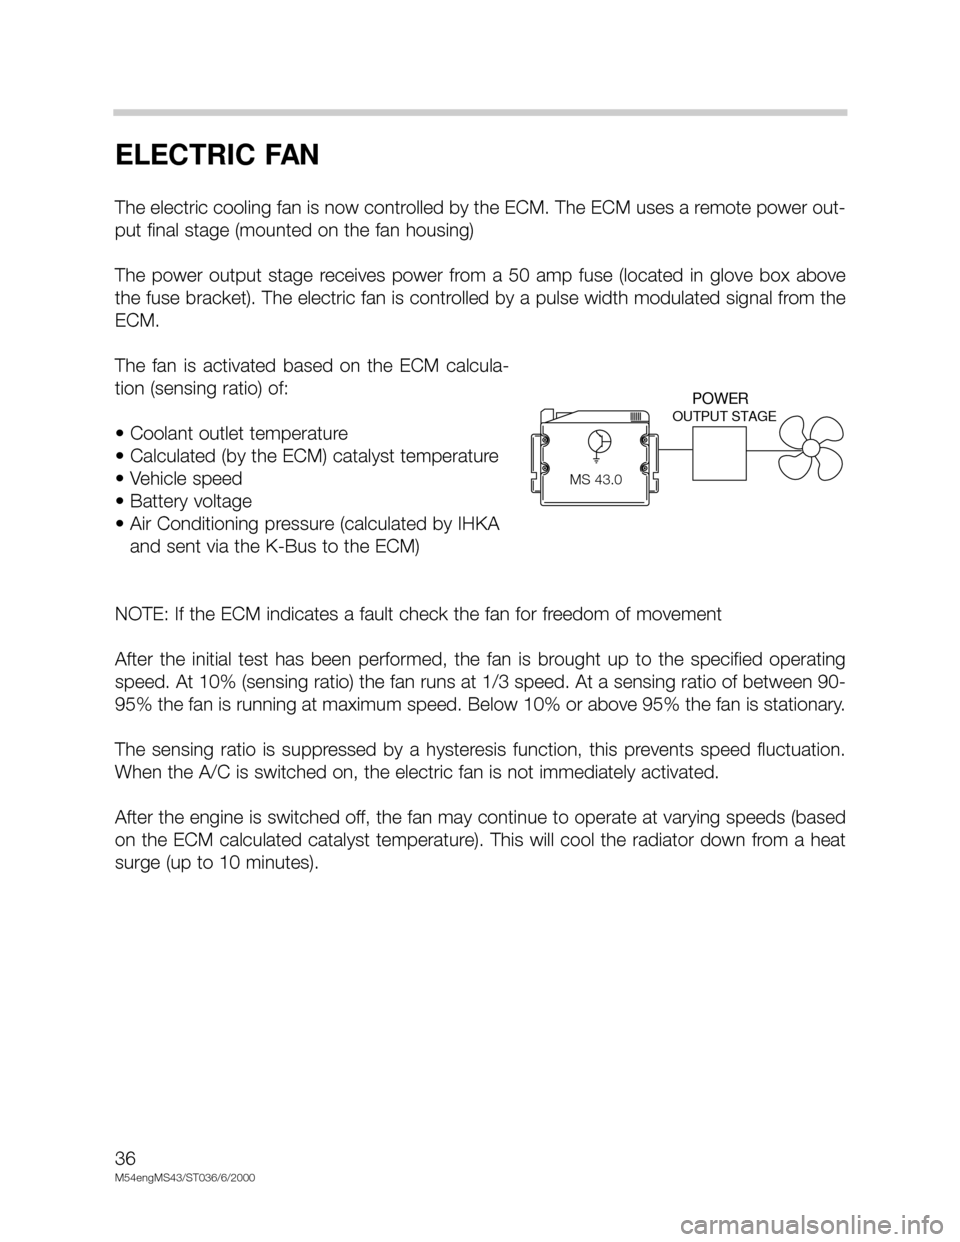 BMW X5 2005 E53 M54 Engine Owners Guide 36
M54engMS43/ST036/6/2000
ELECTRIC FAN
The electric cooling fan is now controlled by the ECM. The ECM uses a remote power out-
put final stage (mounted on the fan housing)
The  power  output  stage  